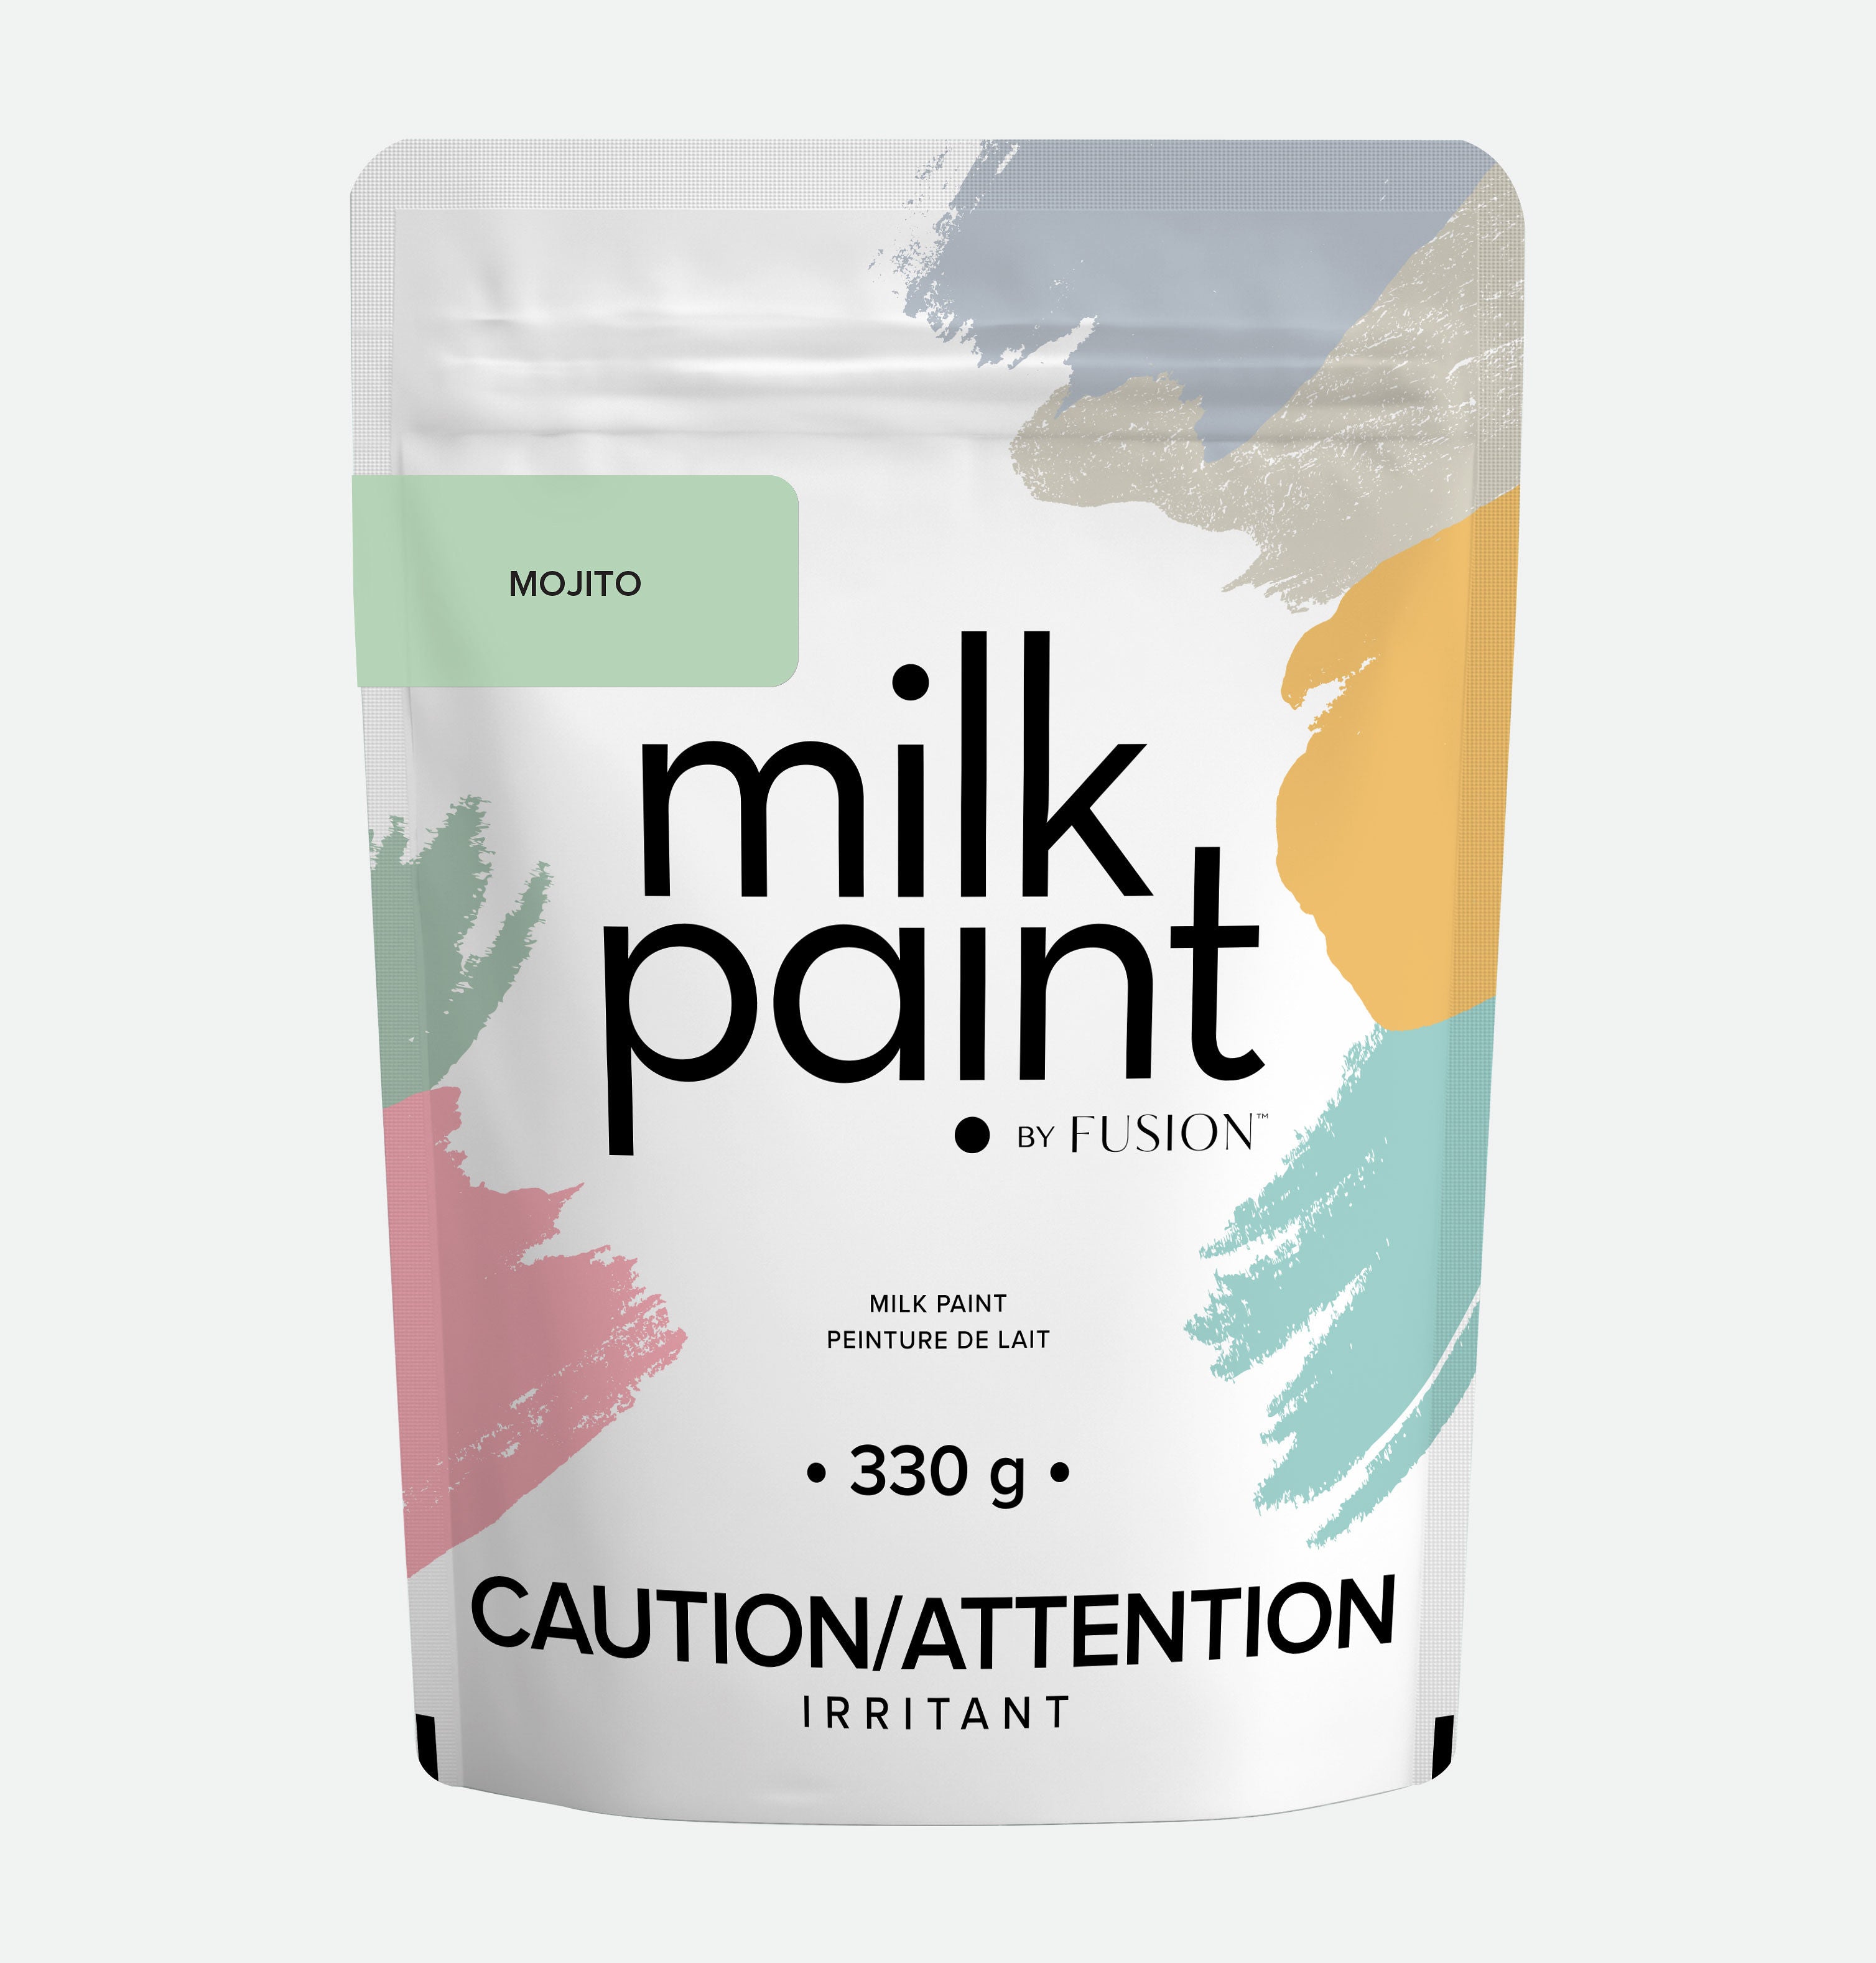 Mojito Milk Paint by Fusion